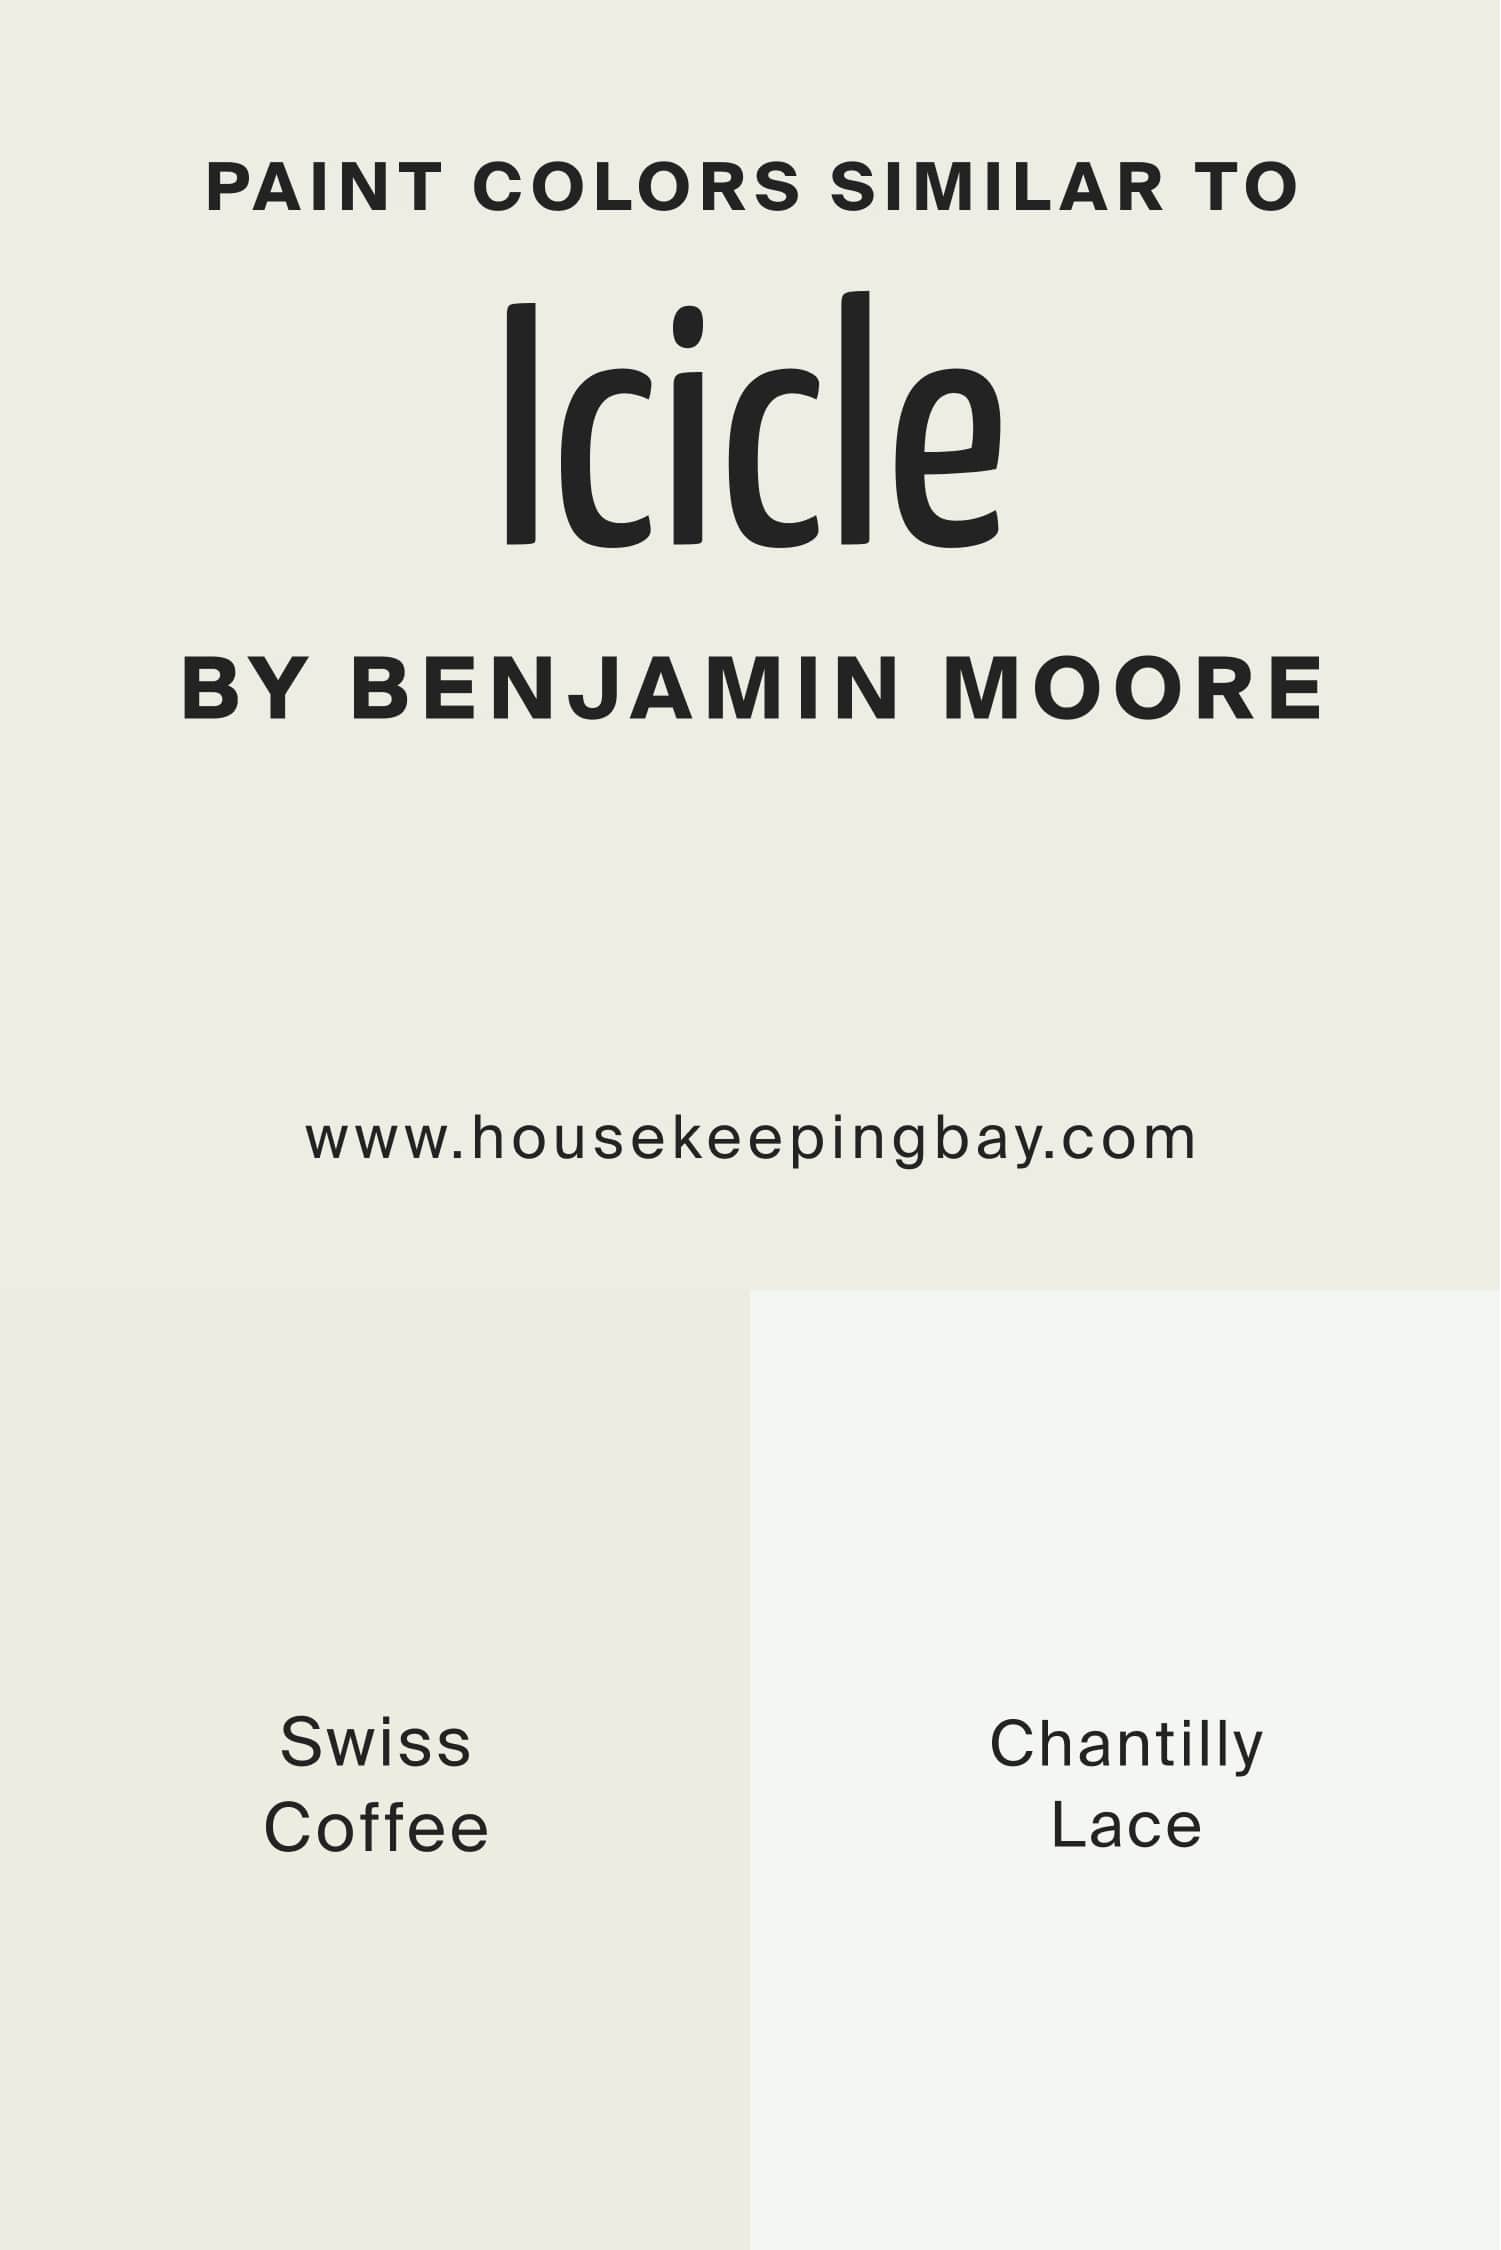 Paint Colors Similar to Icicle 2142 70 by Benjamin Moore